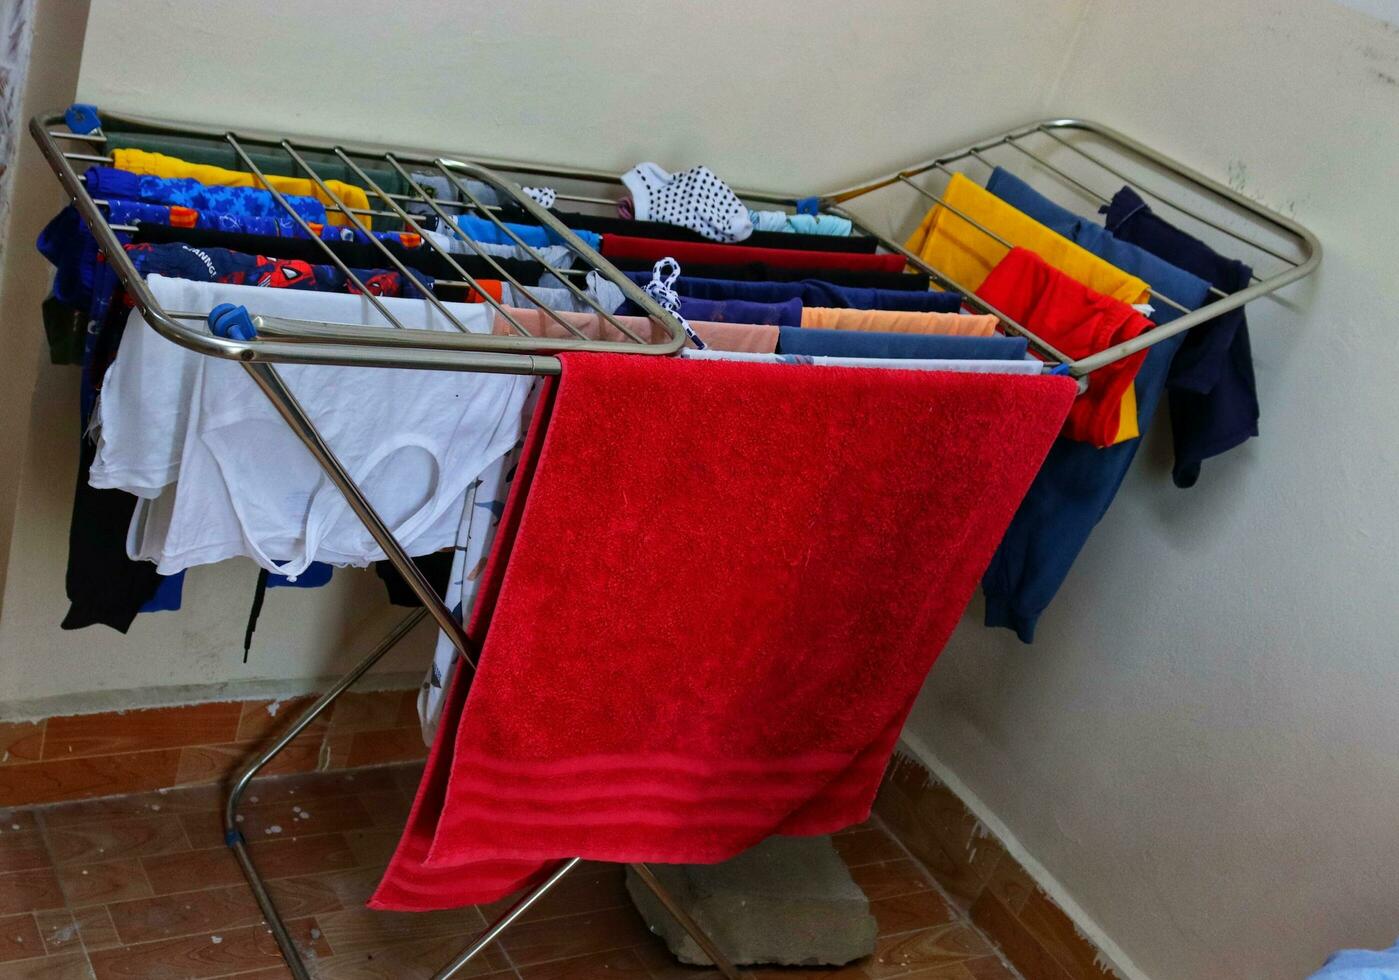 Drying clothes on laundry hanger,balcony cloth drying stand,metal laundry drying rack photo